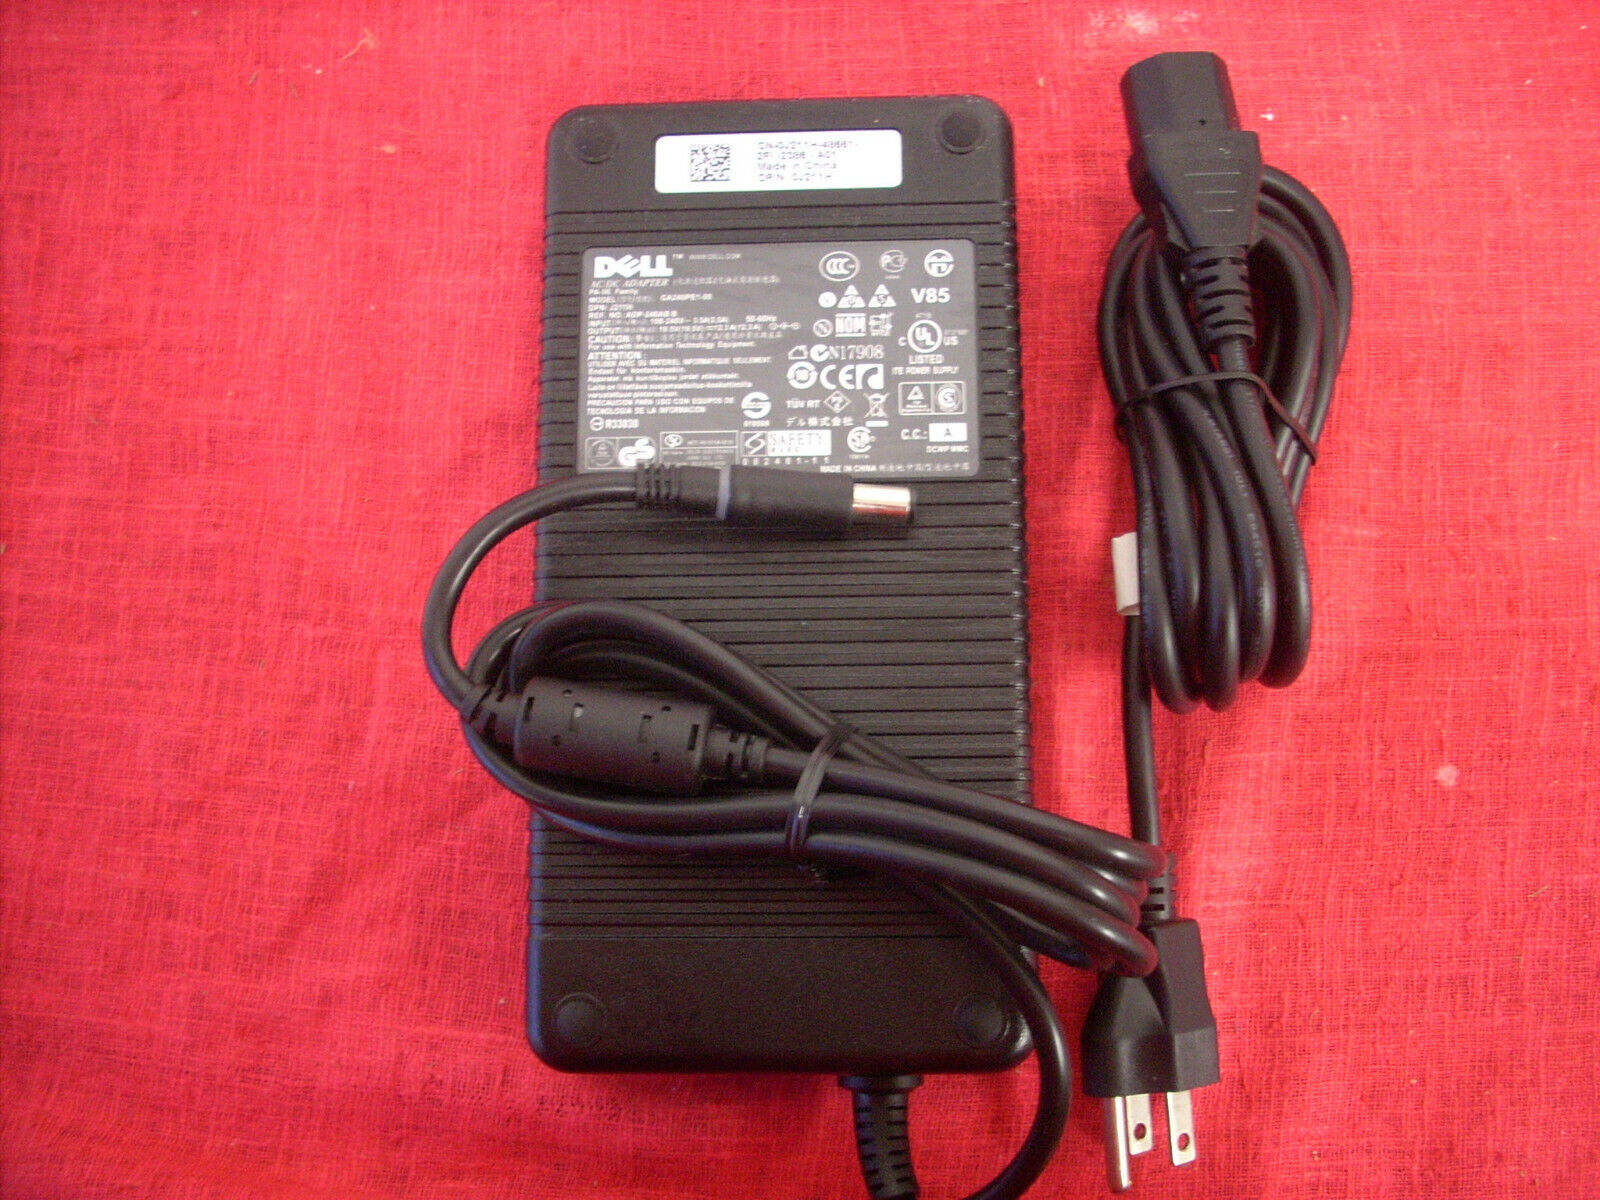 Original Genuine OEM Dell Alienware 17 R3 R4 R5 Power Adapter Charger/Cord 240W Compatible Brand: For Dell Type: AC